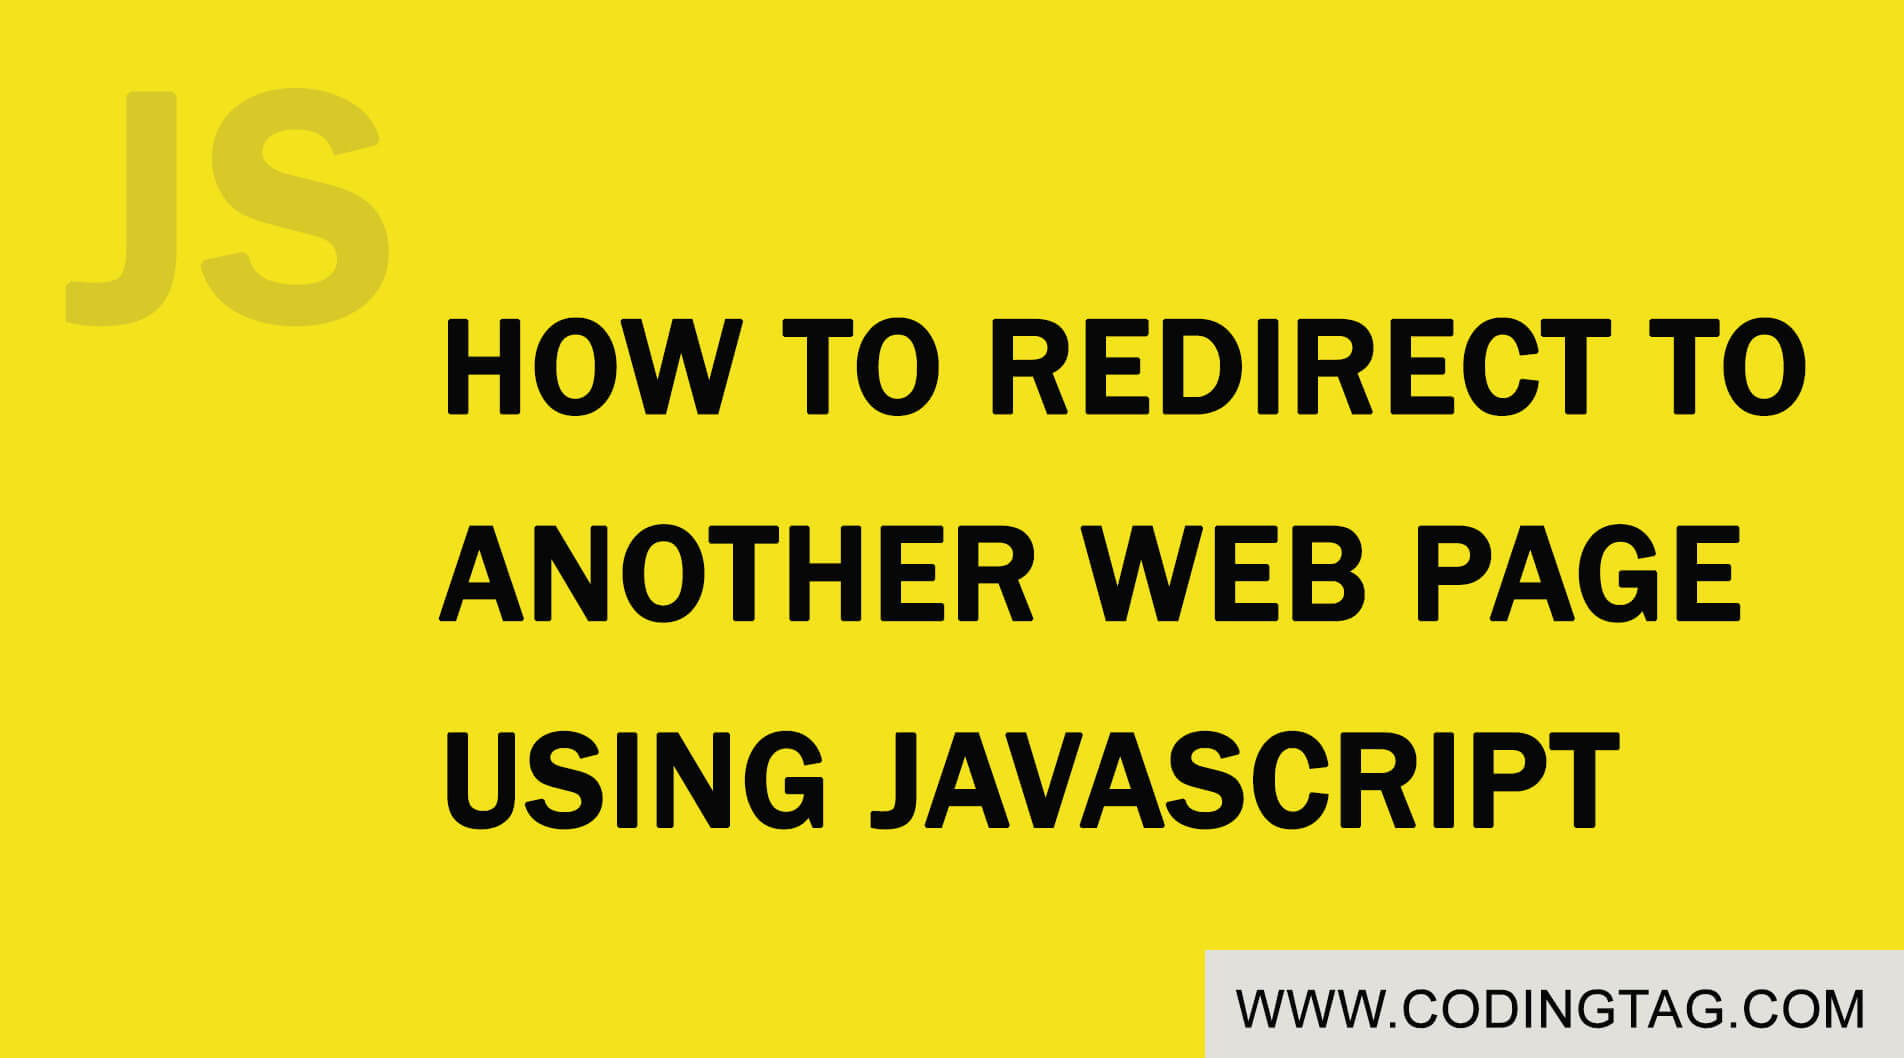 How to redirect to another web page using JavaScript